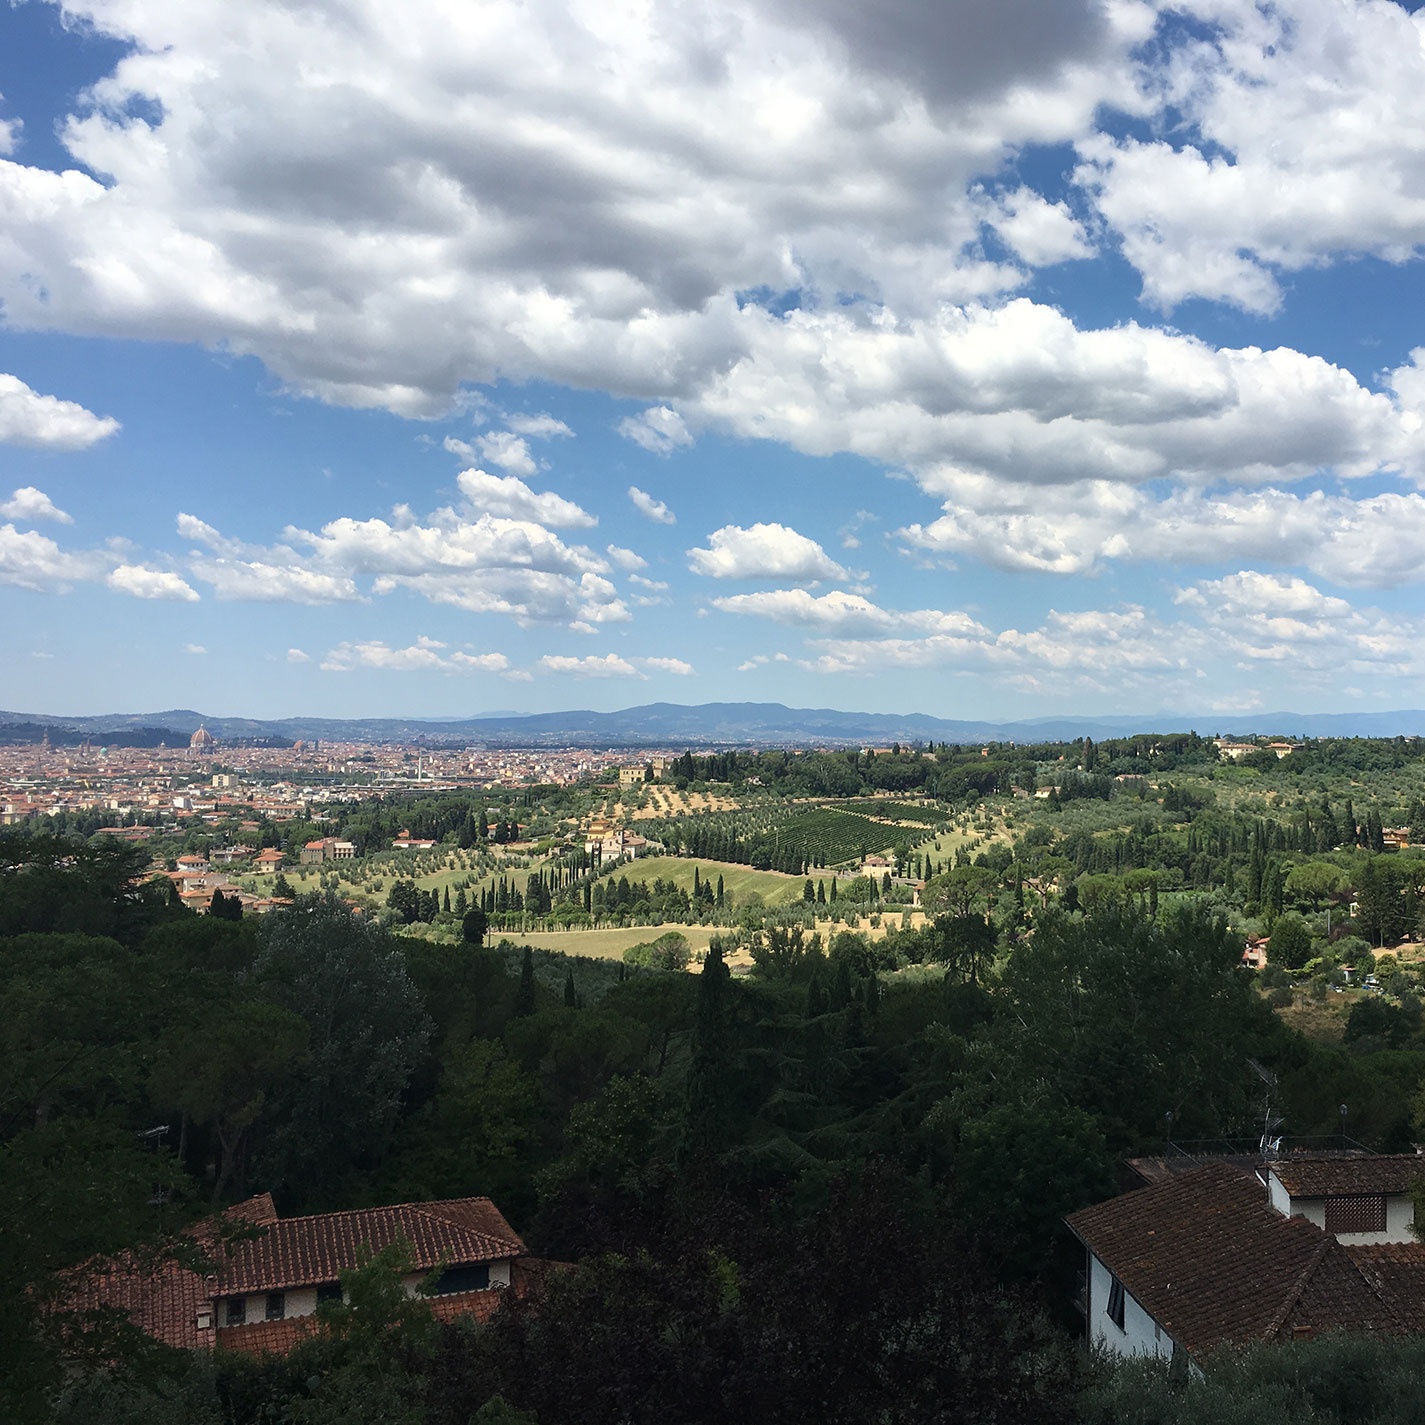 View of the city of Florence